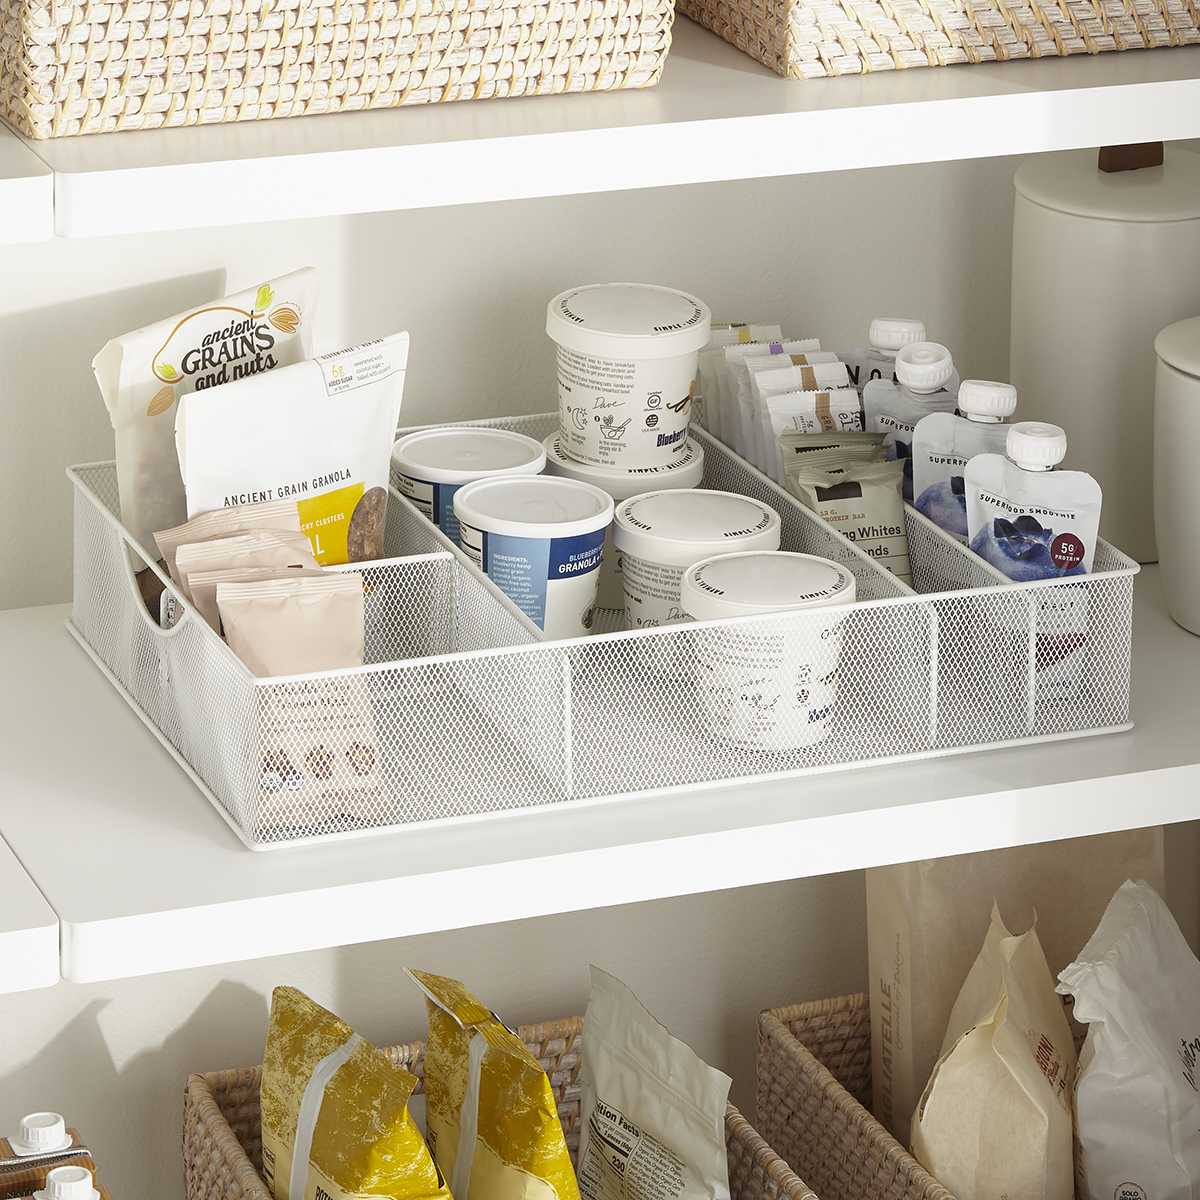 https://www.containerstore.com/catalogimages/419410/10042013_5-Section_Mesh_Food_Storage.jpg